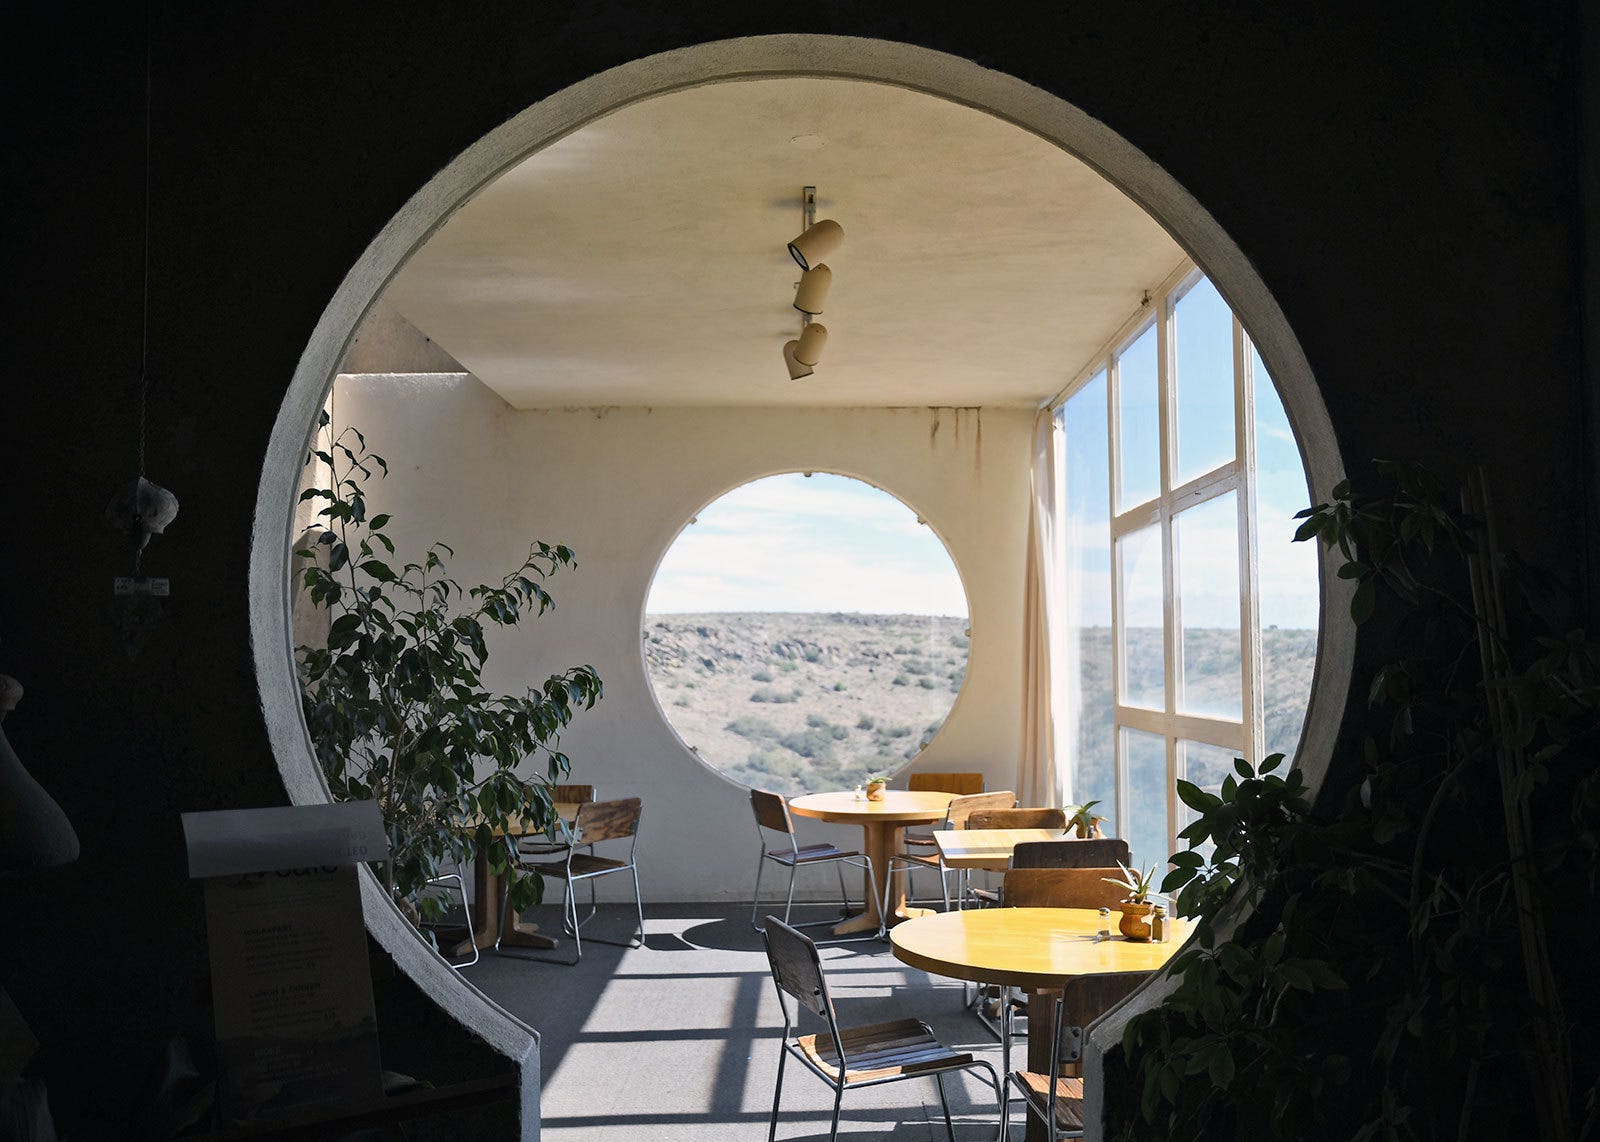 A beautiful view onto a landscape through a window from inside Arcosanti